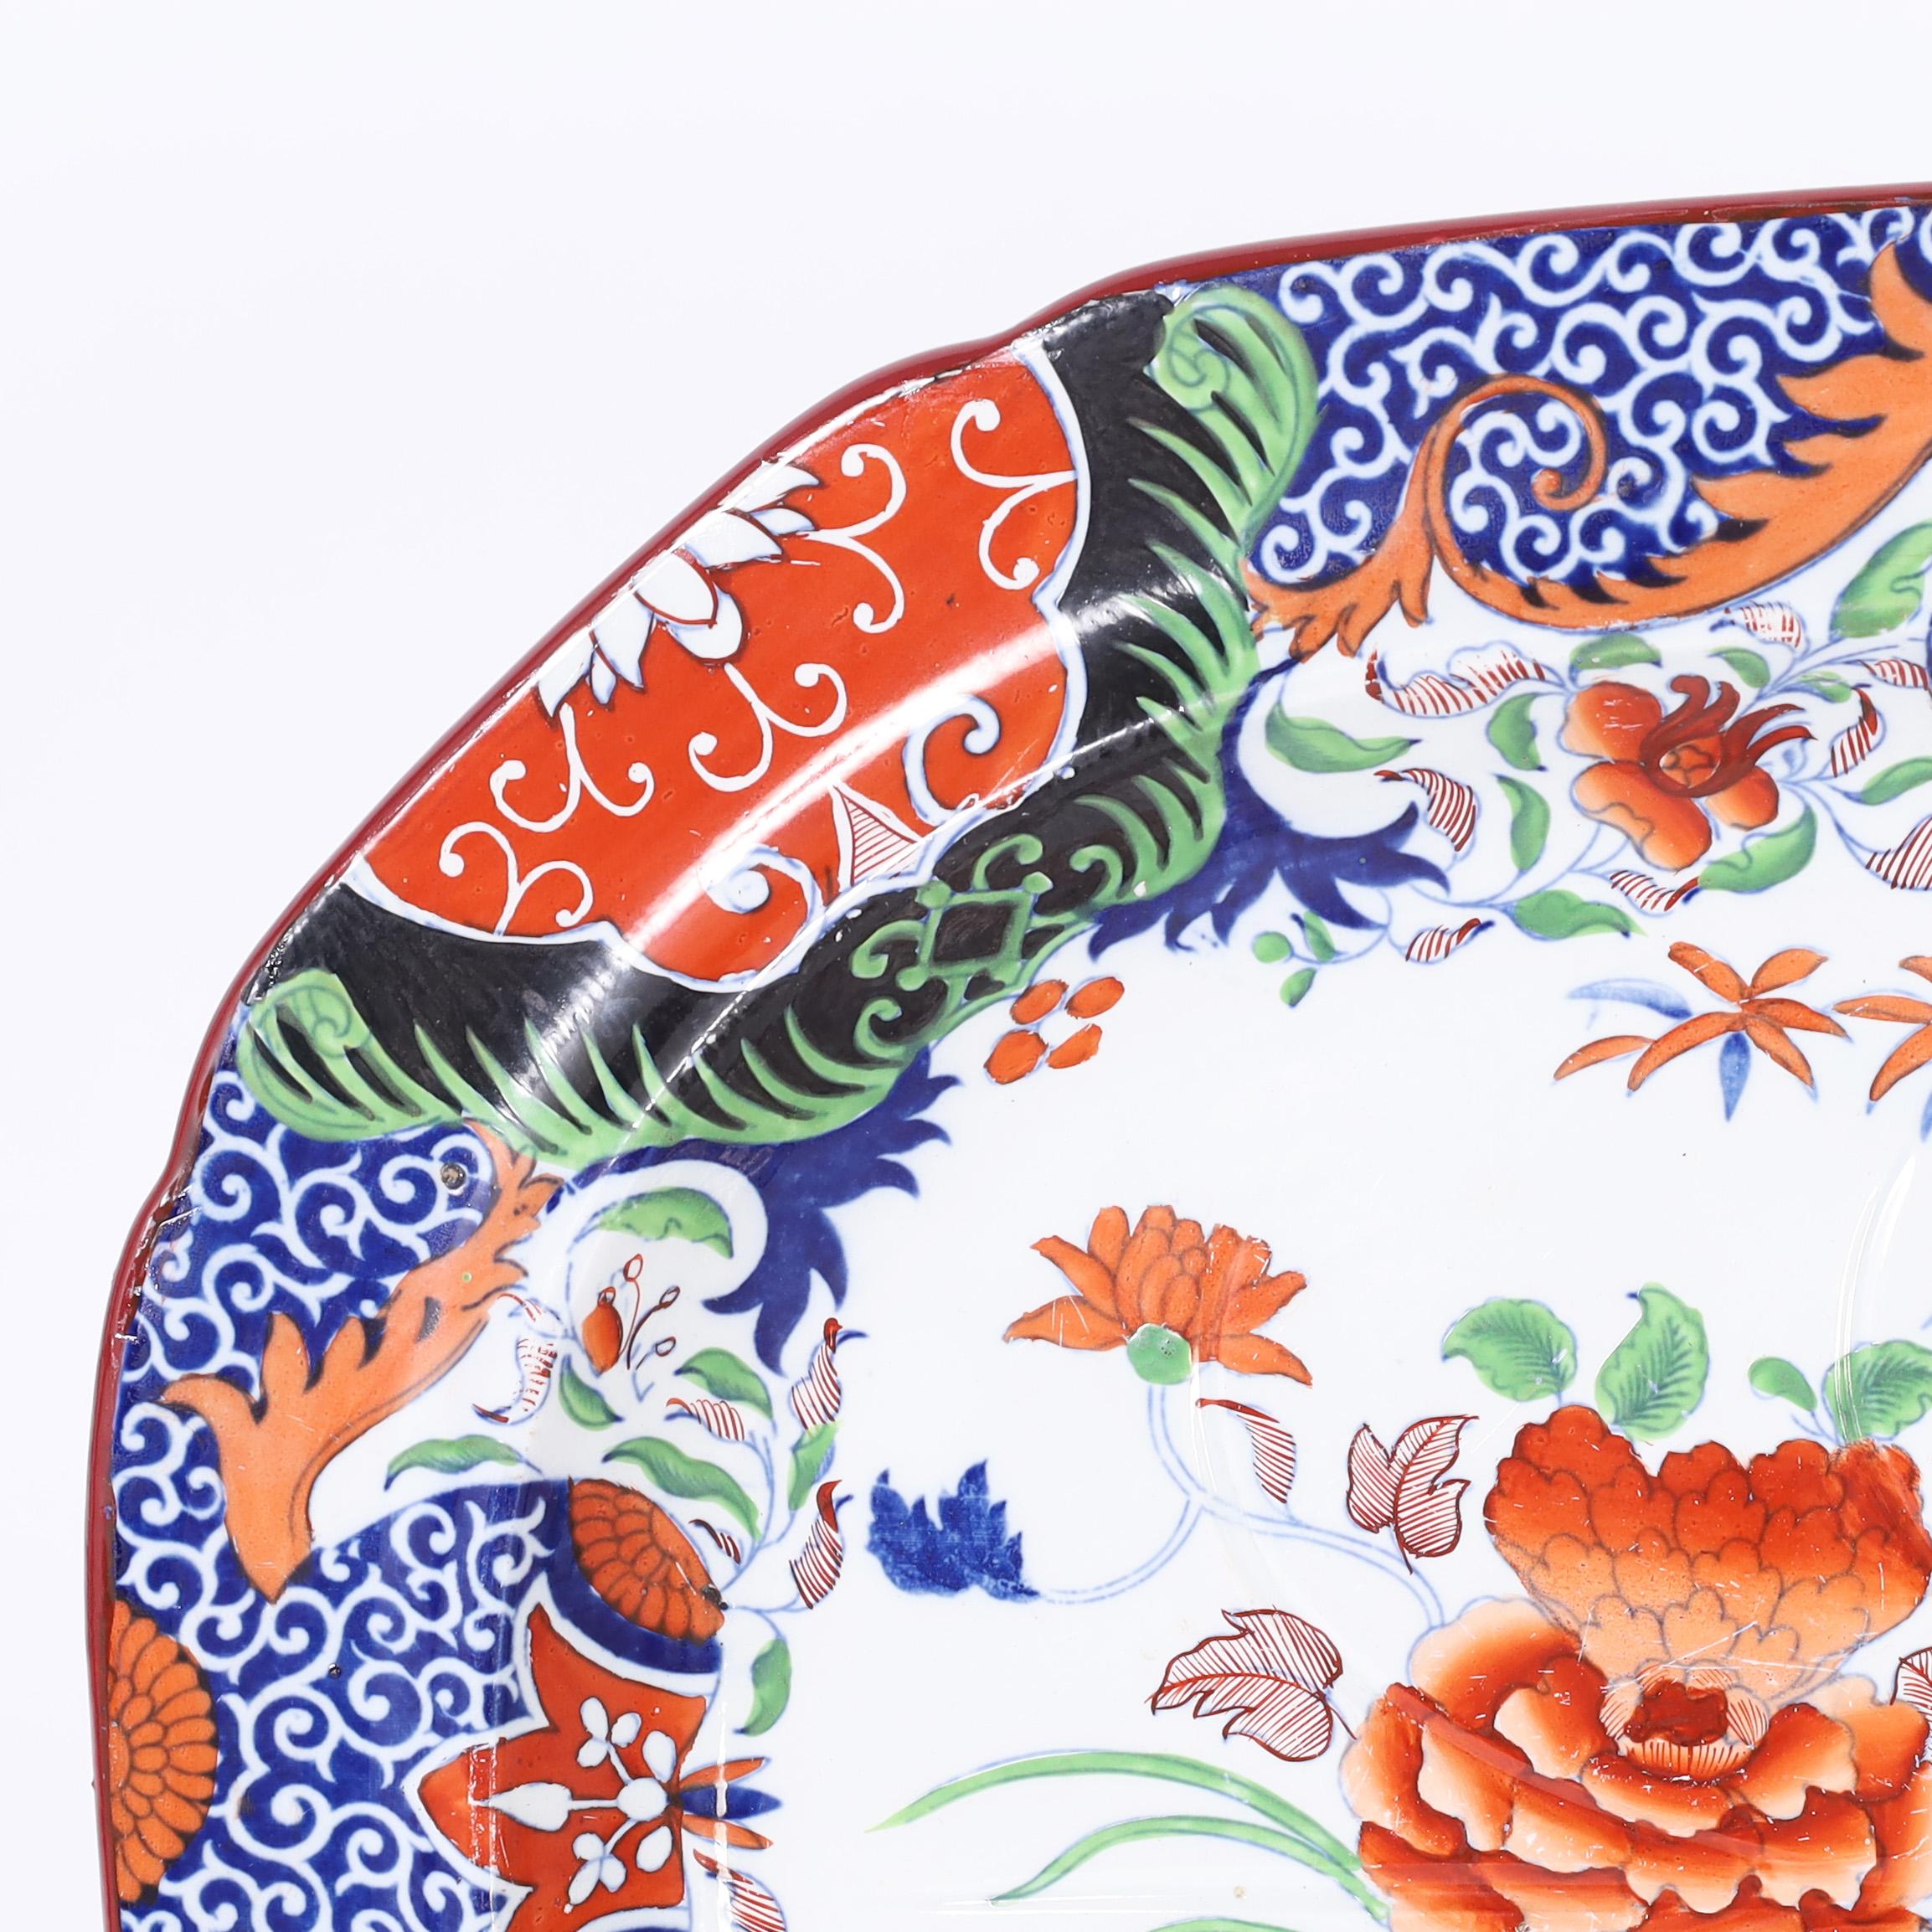 Striking 19th Century English ironstone platter hand decorated in Chinoiserie with bamboo trees and flowers inside a colorful floral border. 